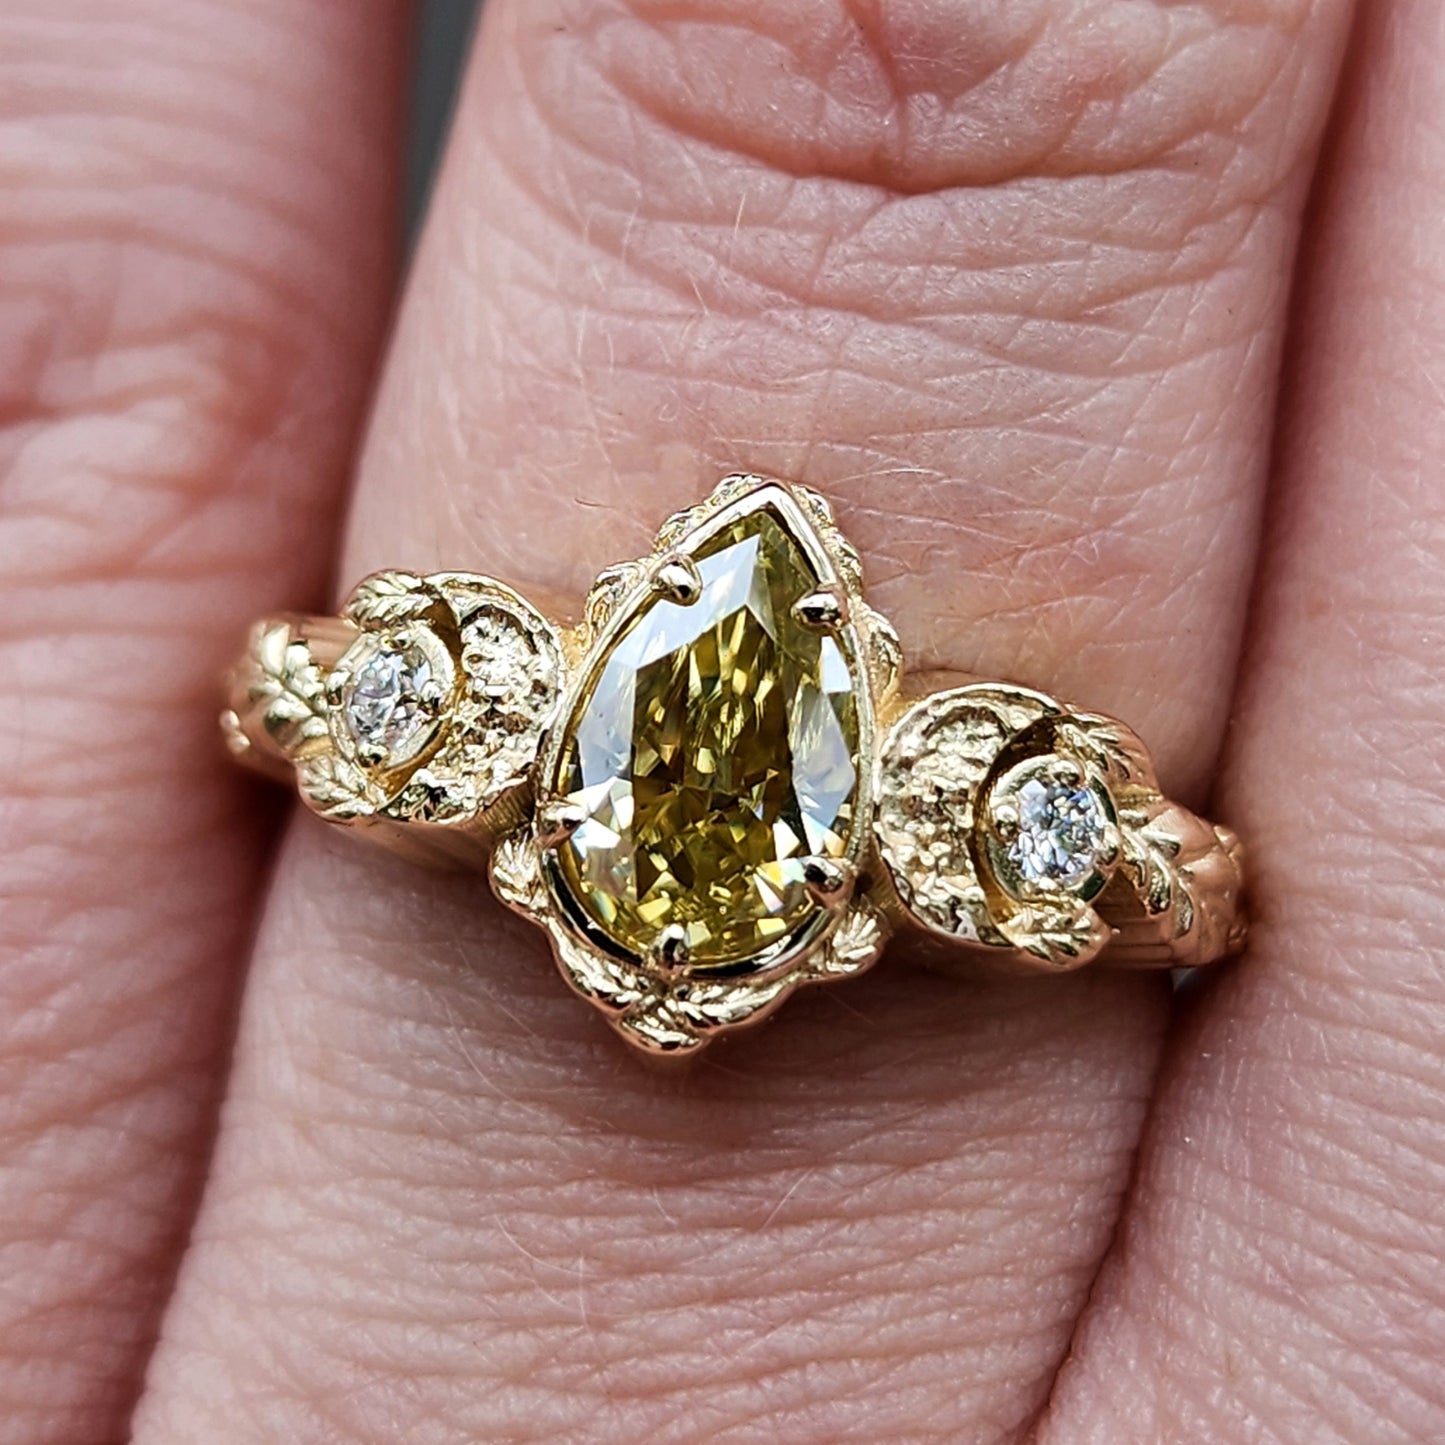 Leaf & Crescent Moon Ring with Yellow Moissanite Tear Drop and White Diamonds - Nature Inspired Engagement Ring